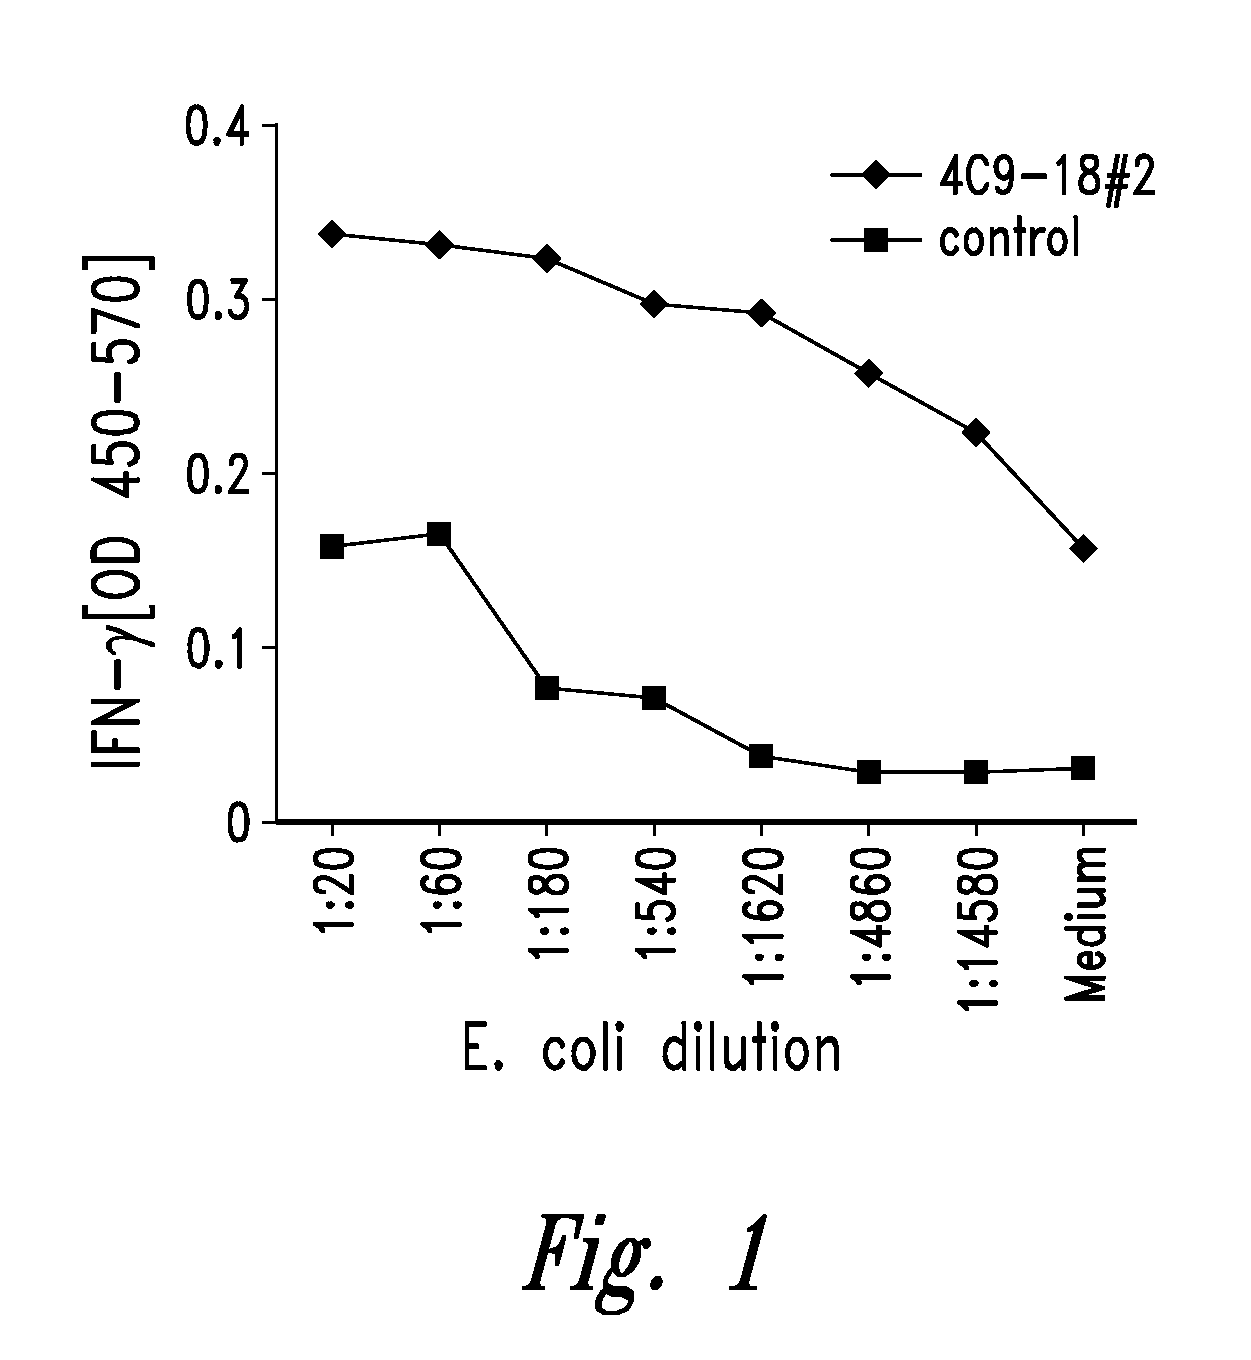 Compounds and methods for treatment and diagnosis of chlamydial infection